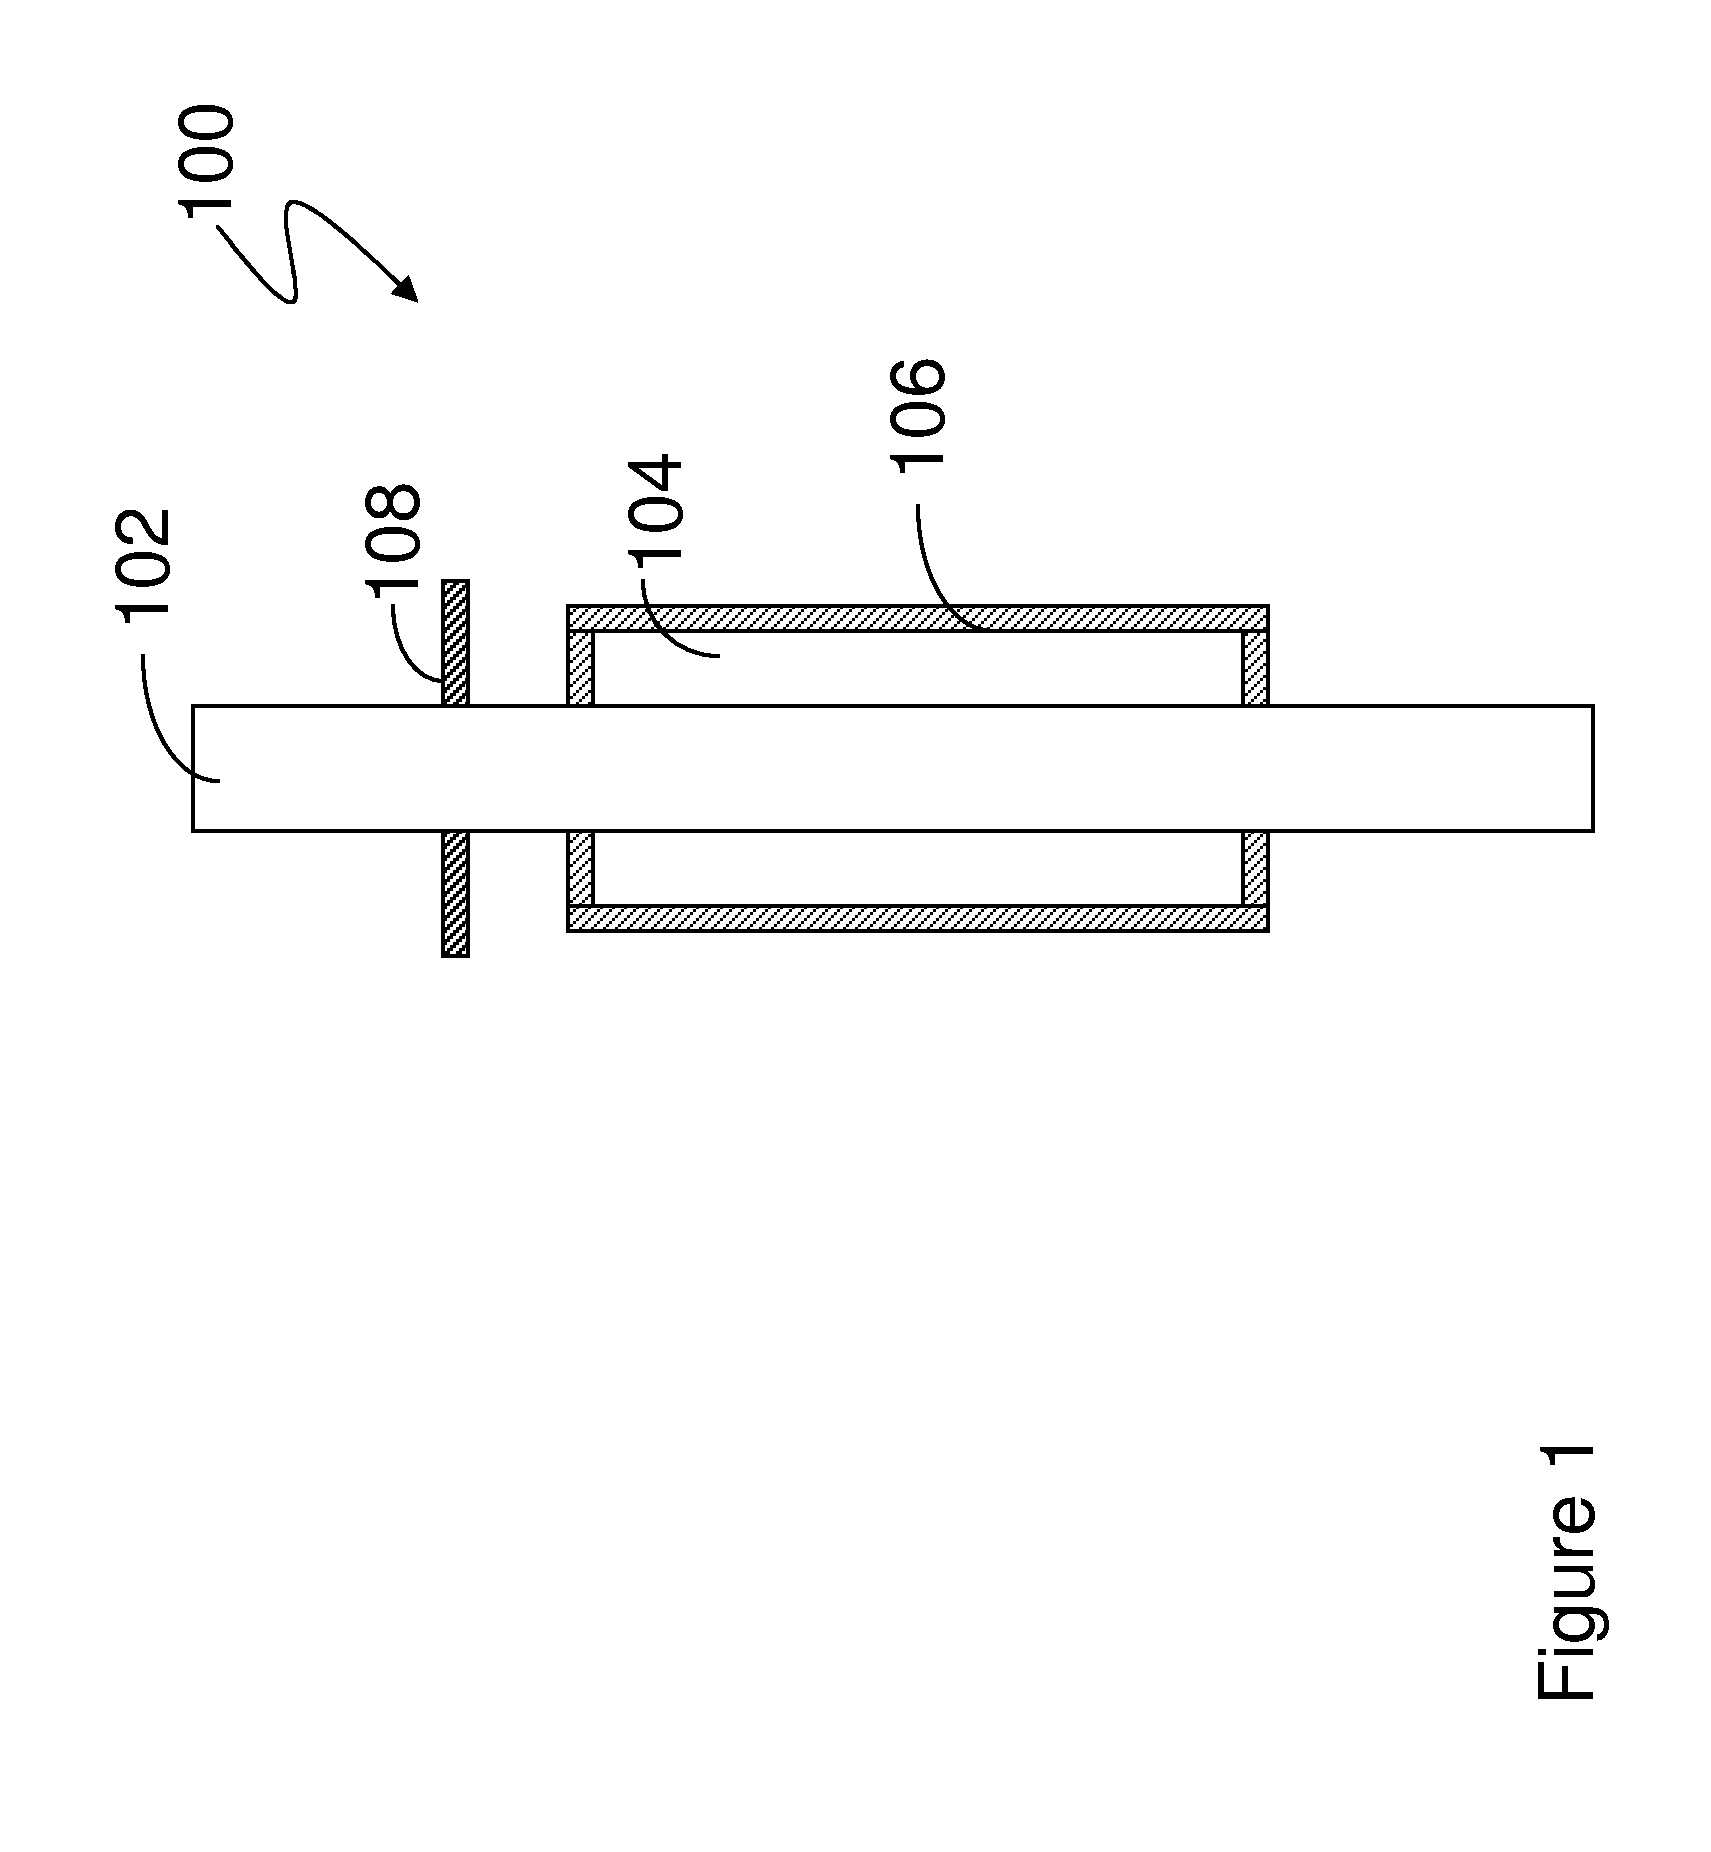 Sealing system, method of manufacture thereof and articles comprising the same